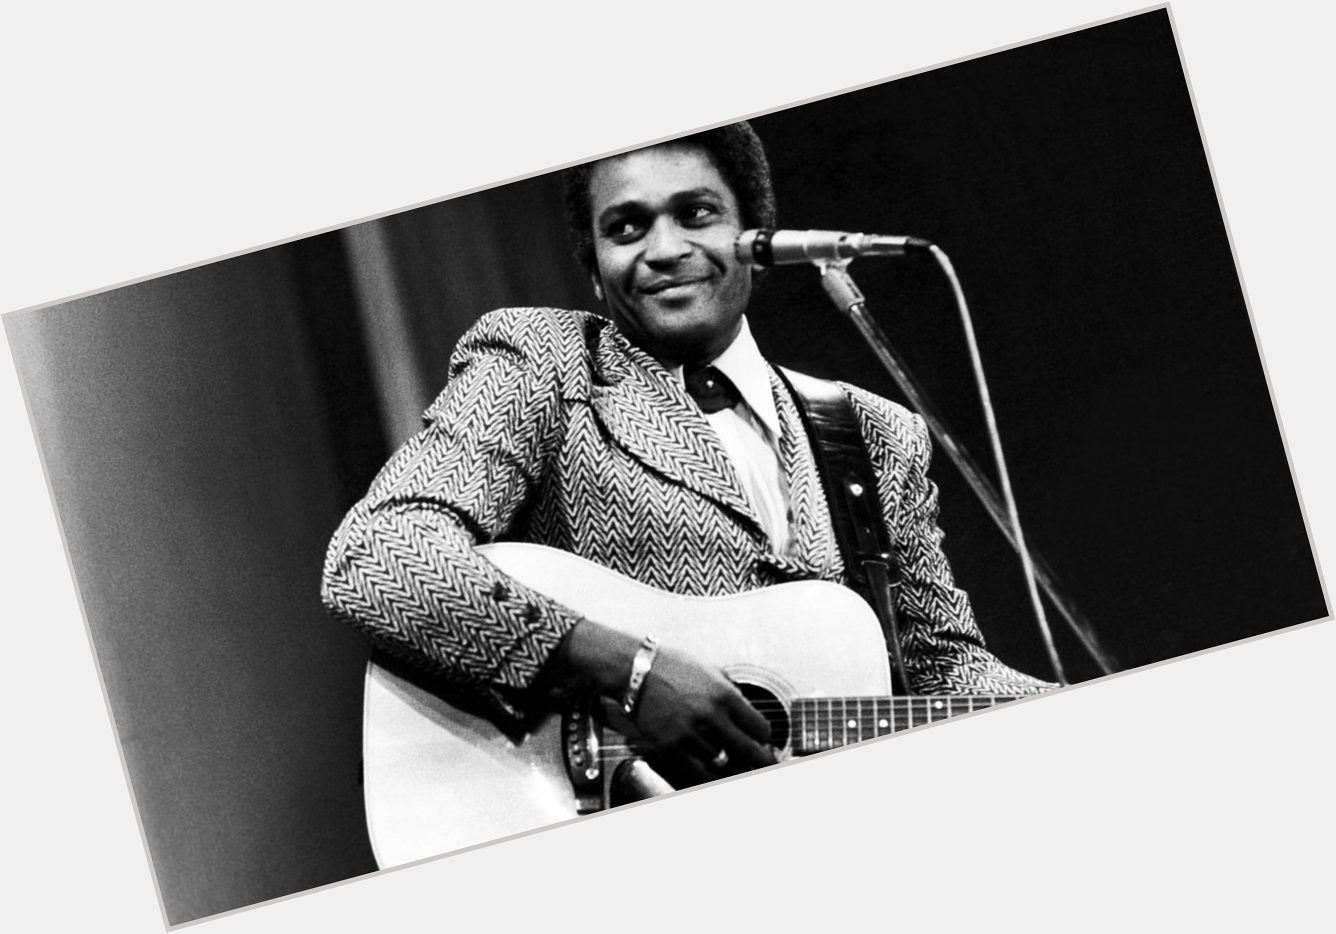 Happy Birthday to Charley Pride, who turns 83 today! 